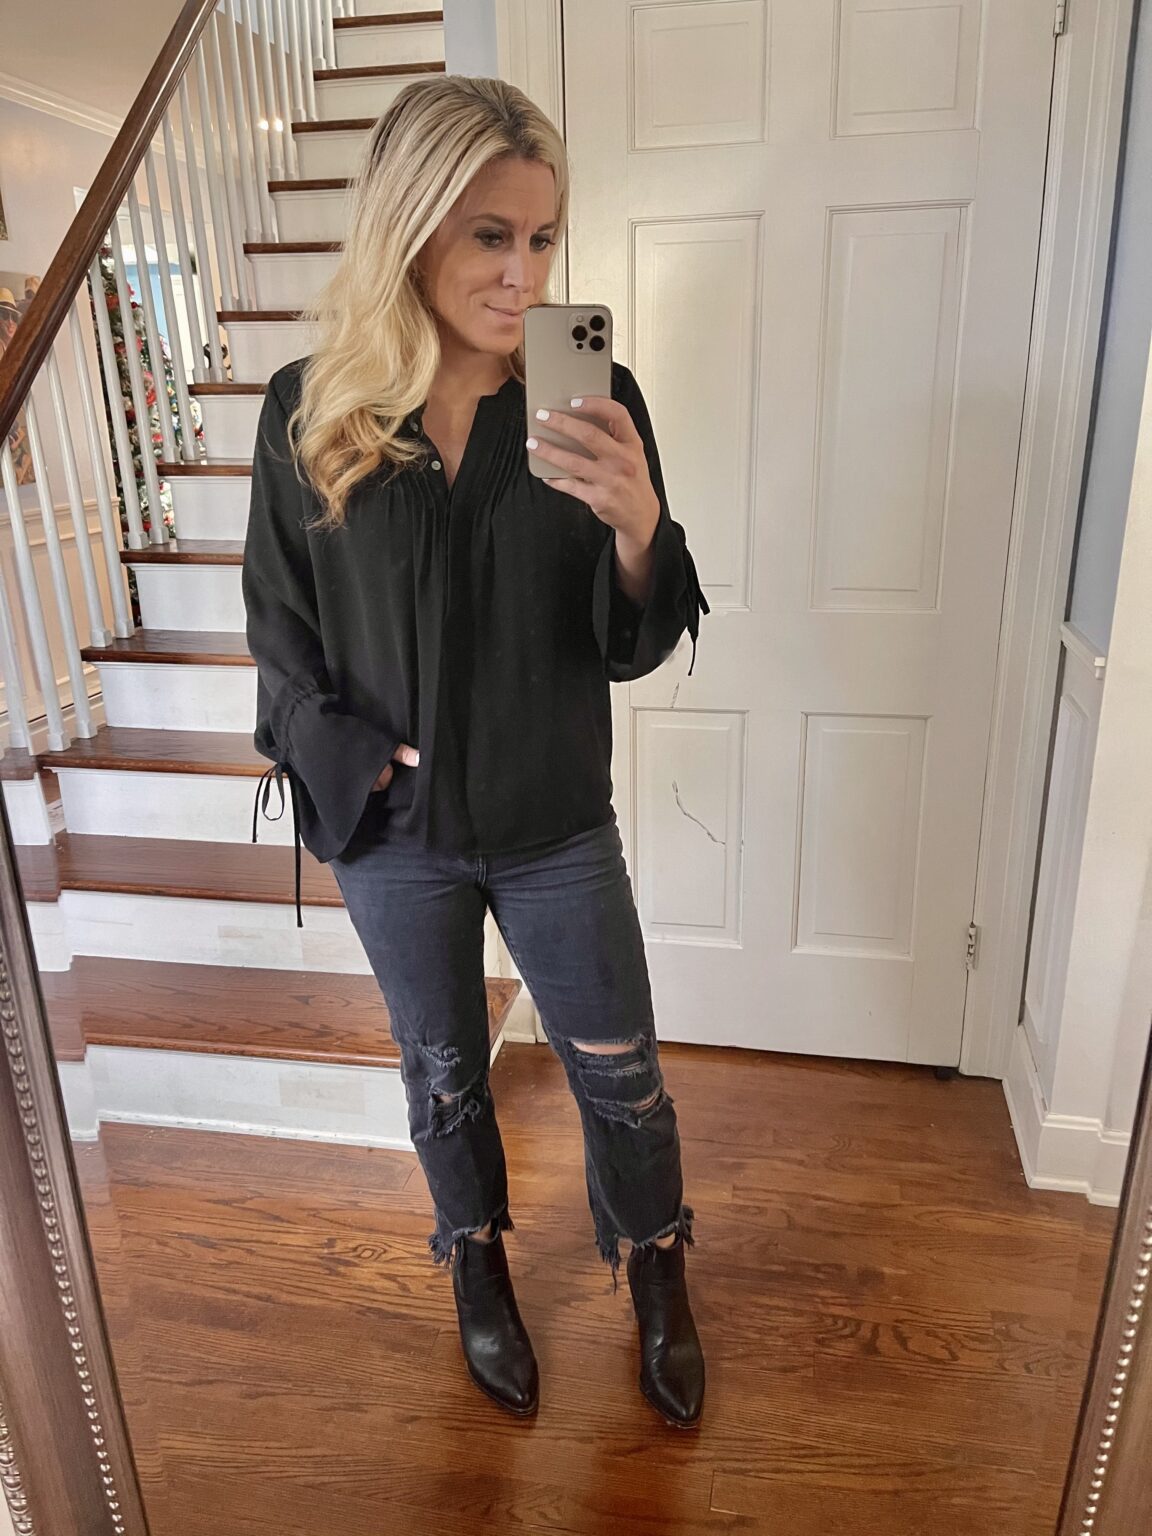 What to Wear with Black Shirt - 6 Styles - Stylish Life for Moms